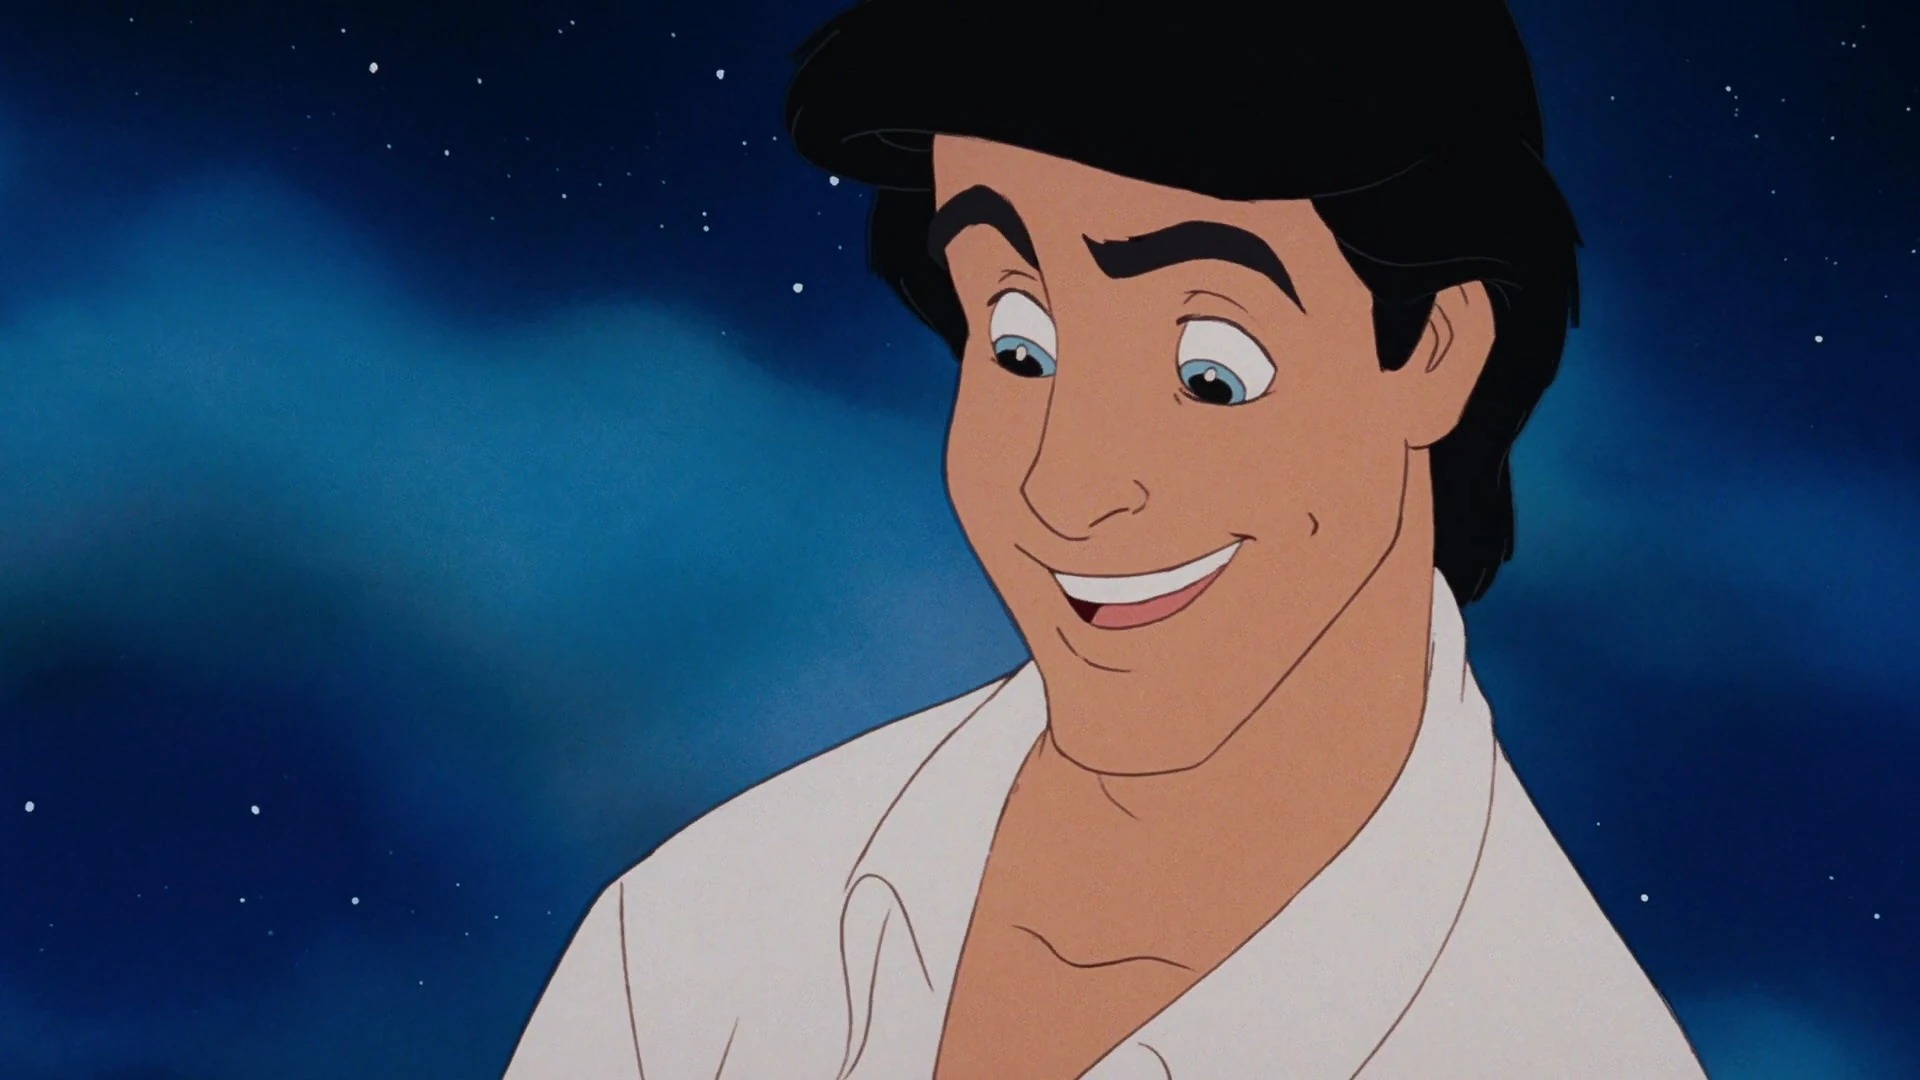 21 Facts About Prince Eric (The Little Mermaid)